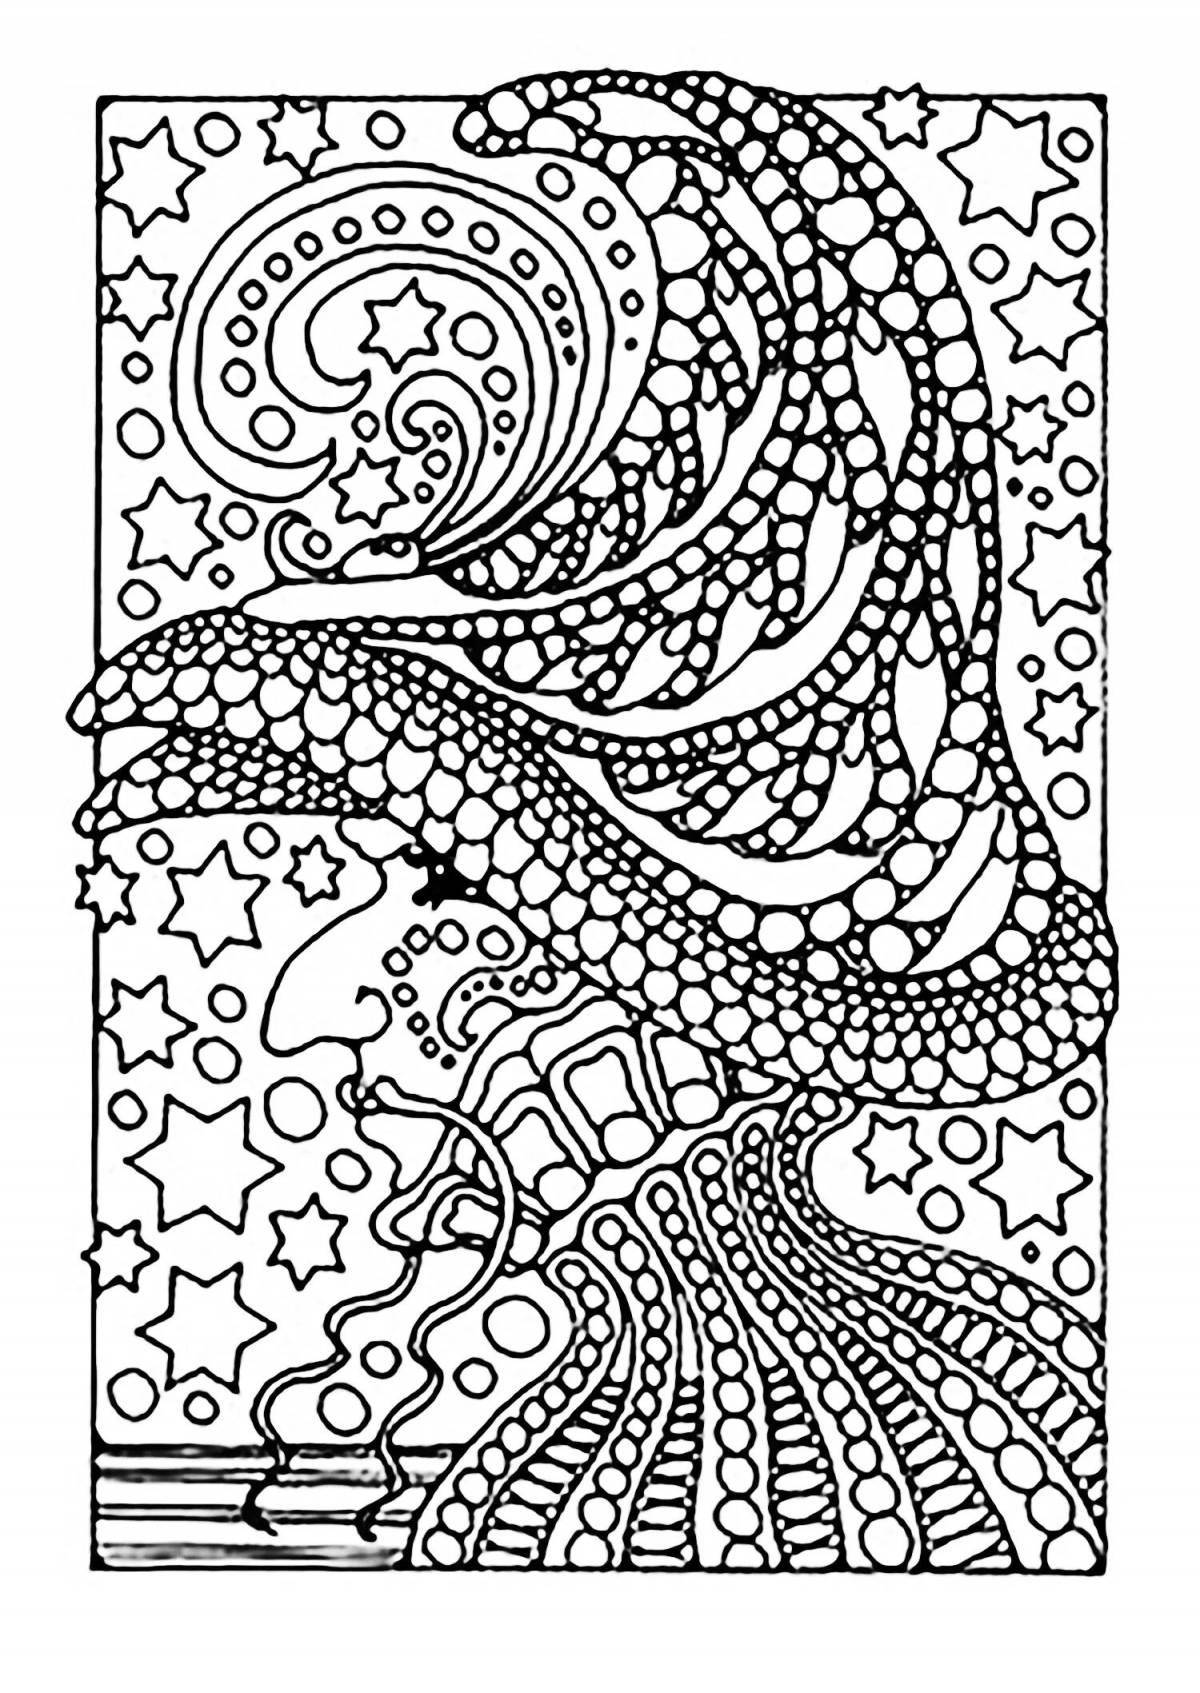 Radiant coloring page happy color for adults ru